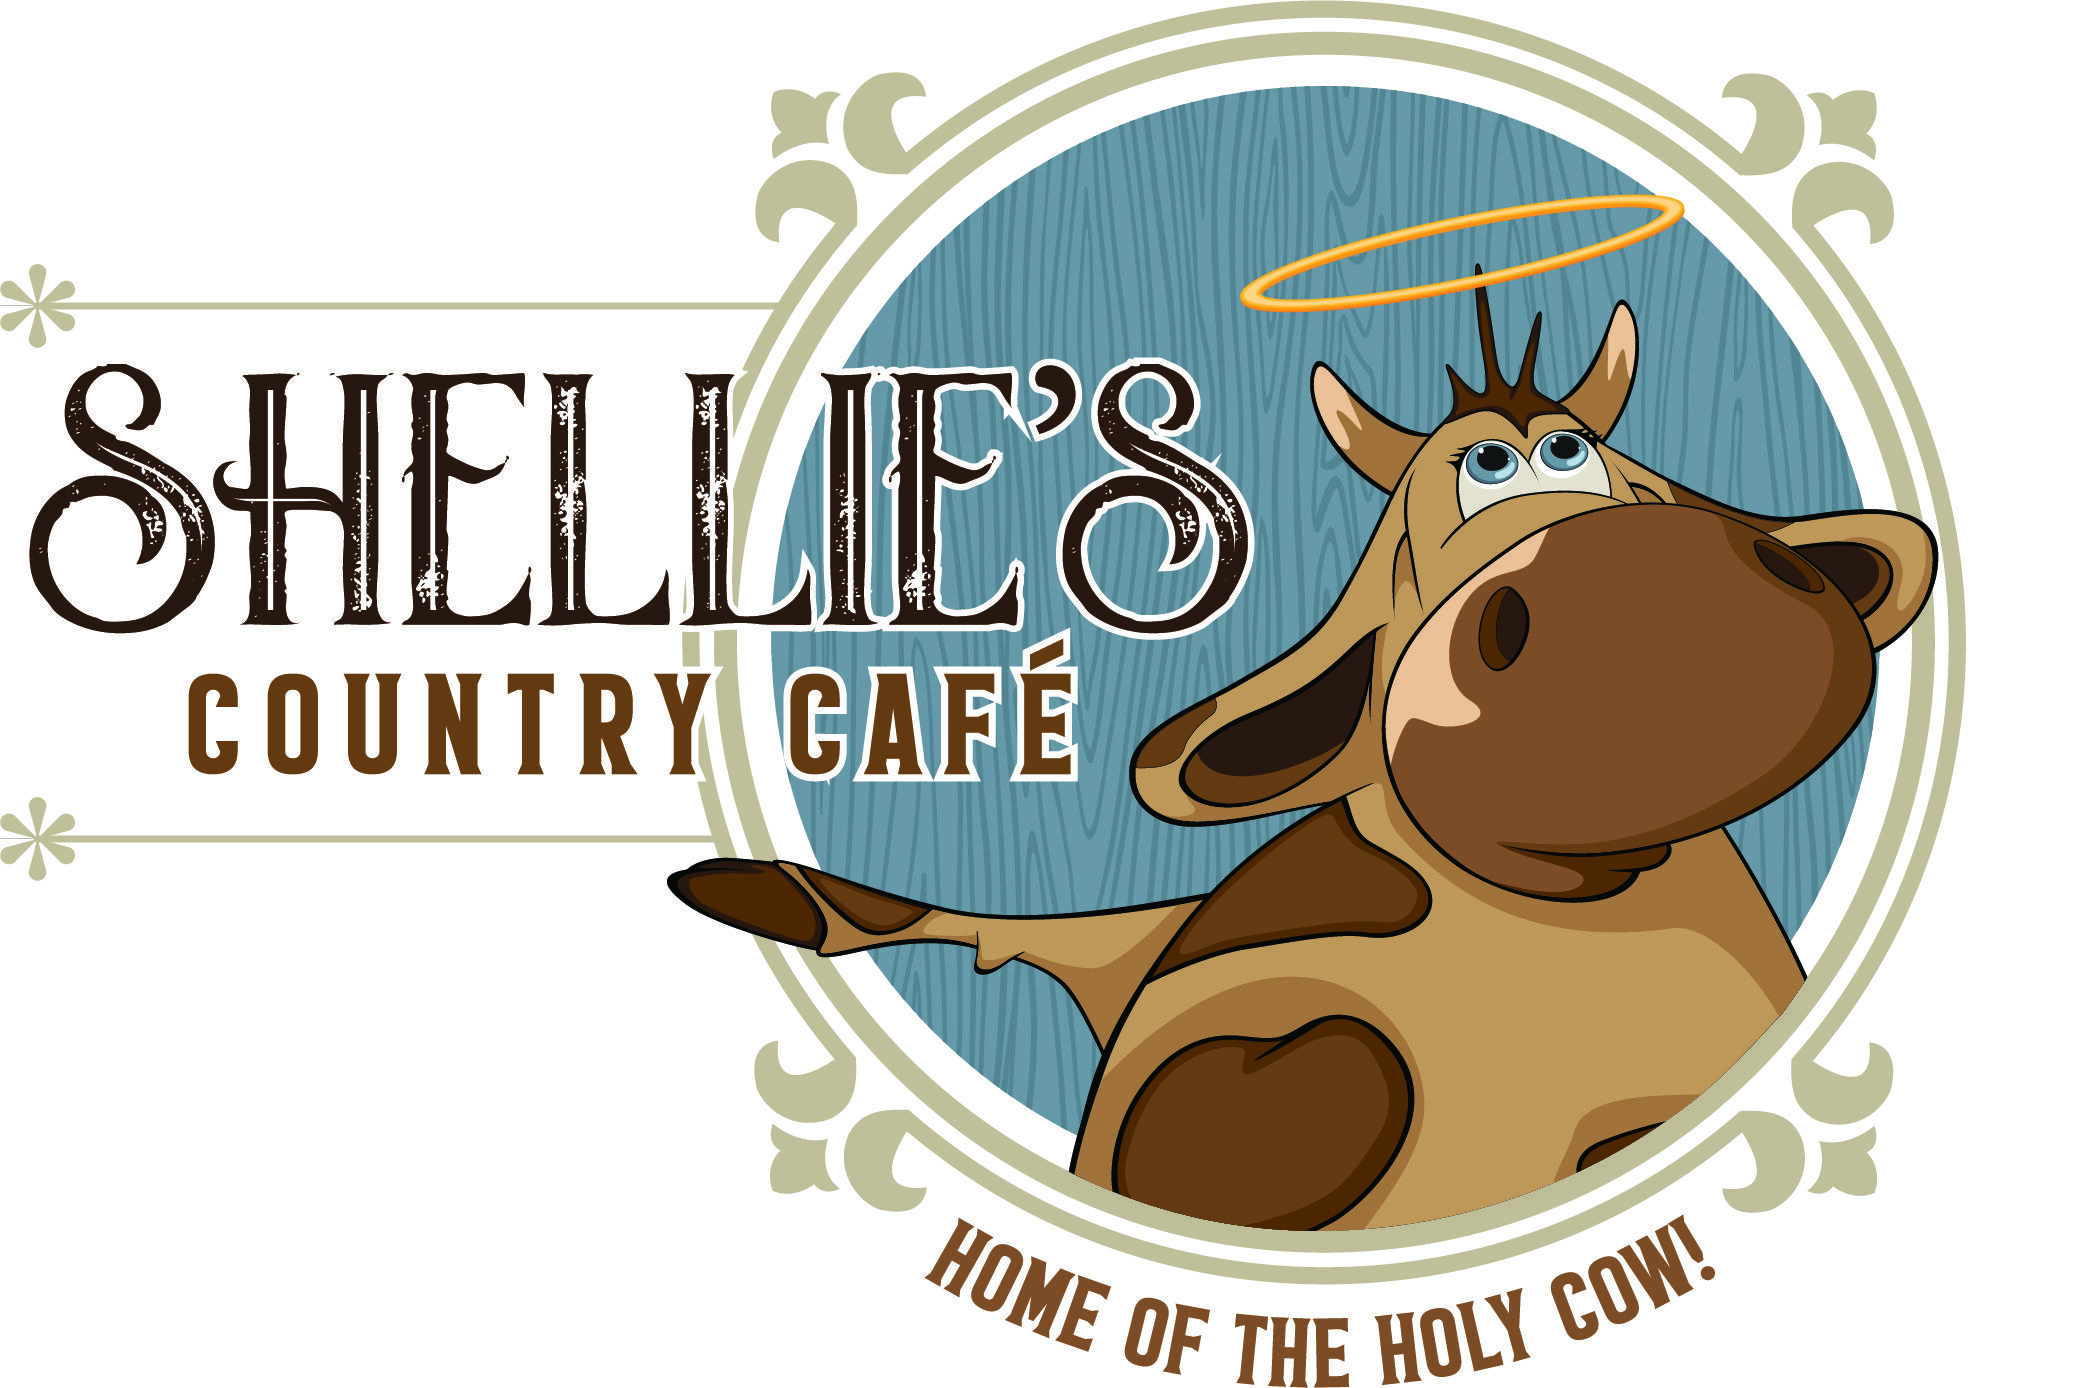 Shellie’s Country Cafe